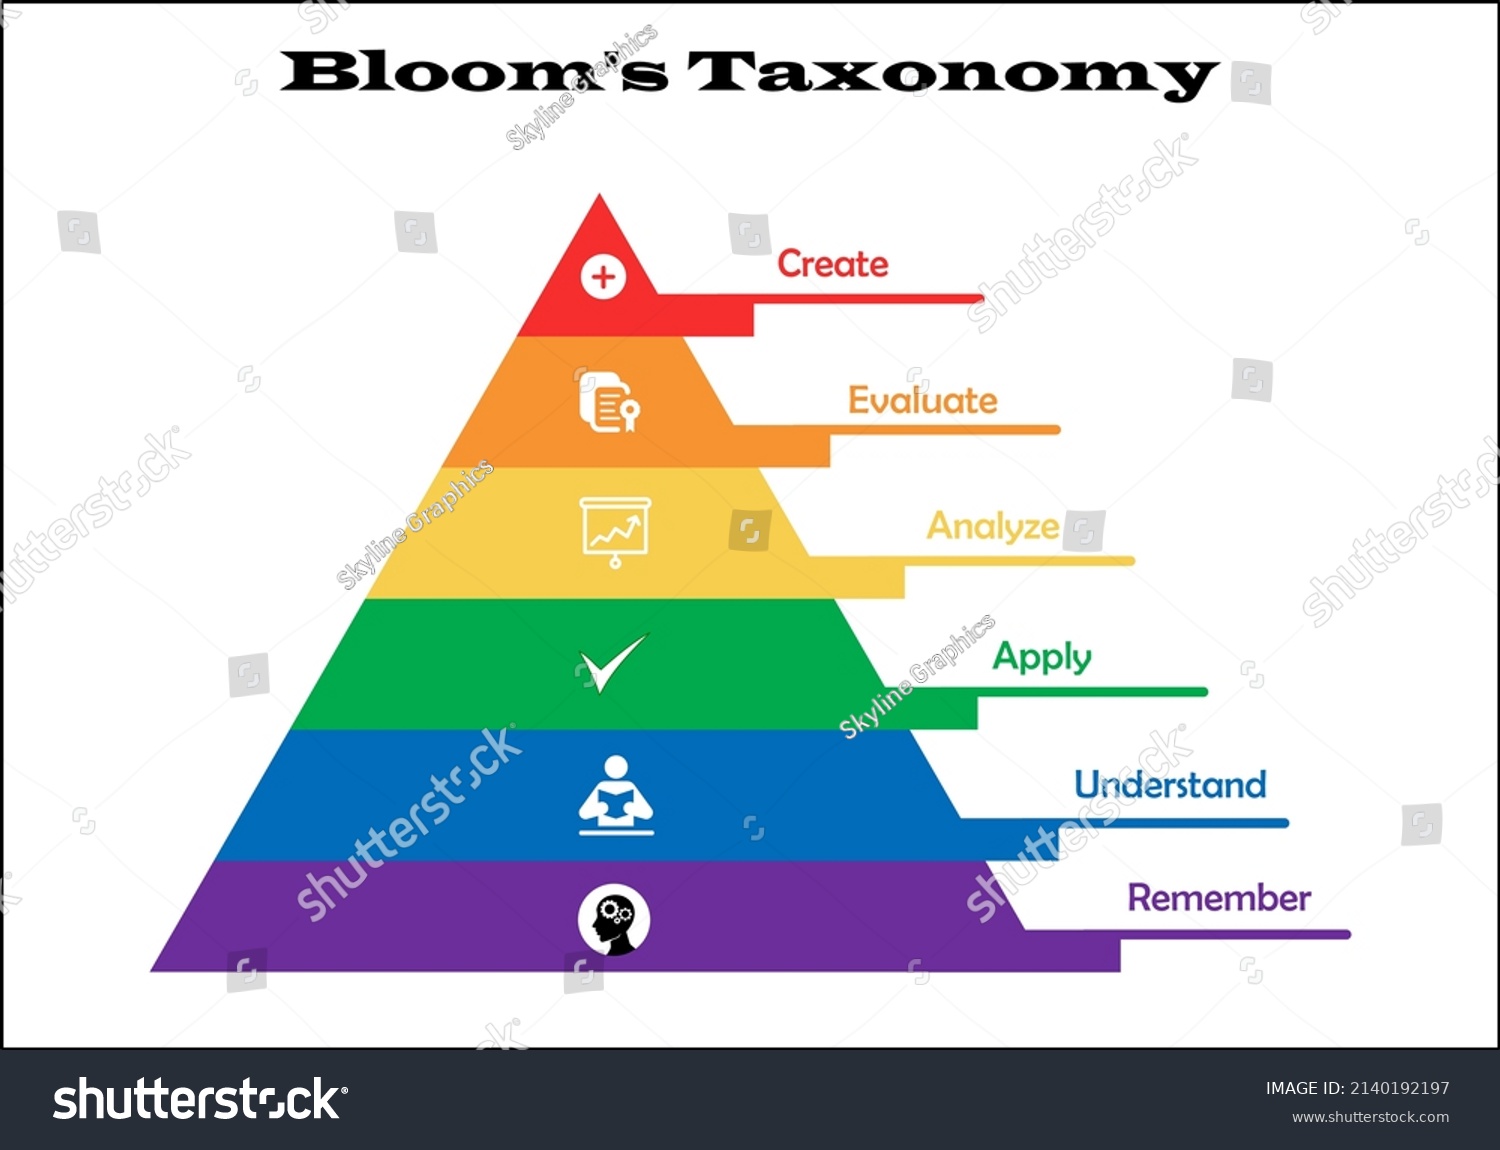 Bloom's Taxonomy Illustration in a pyramid shape, Educational Tool. Concept-based Infographic template #2140192197